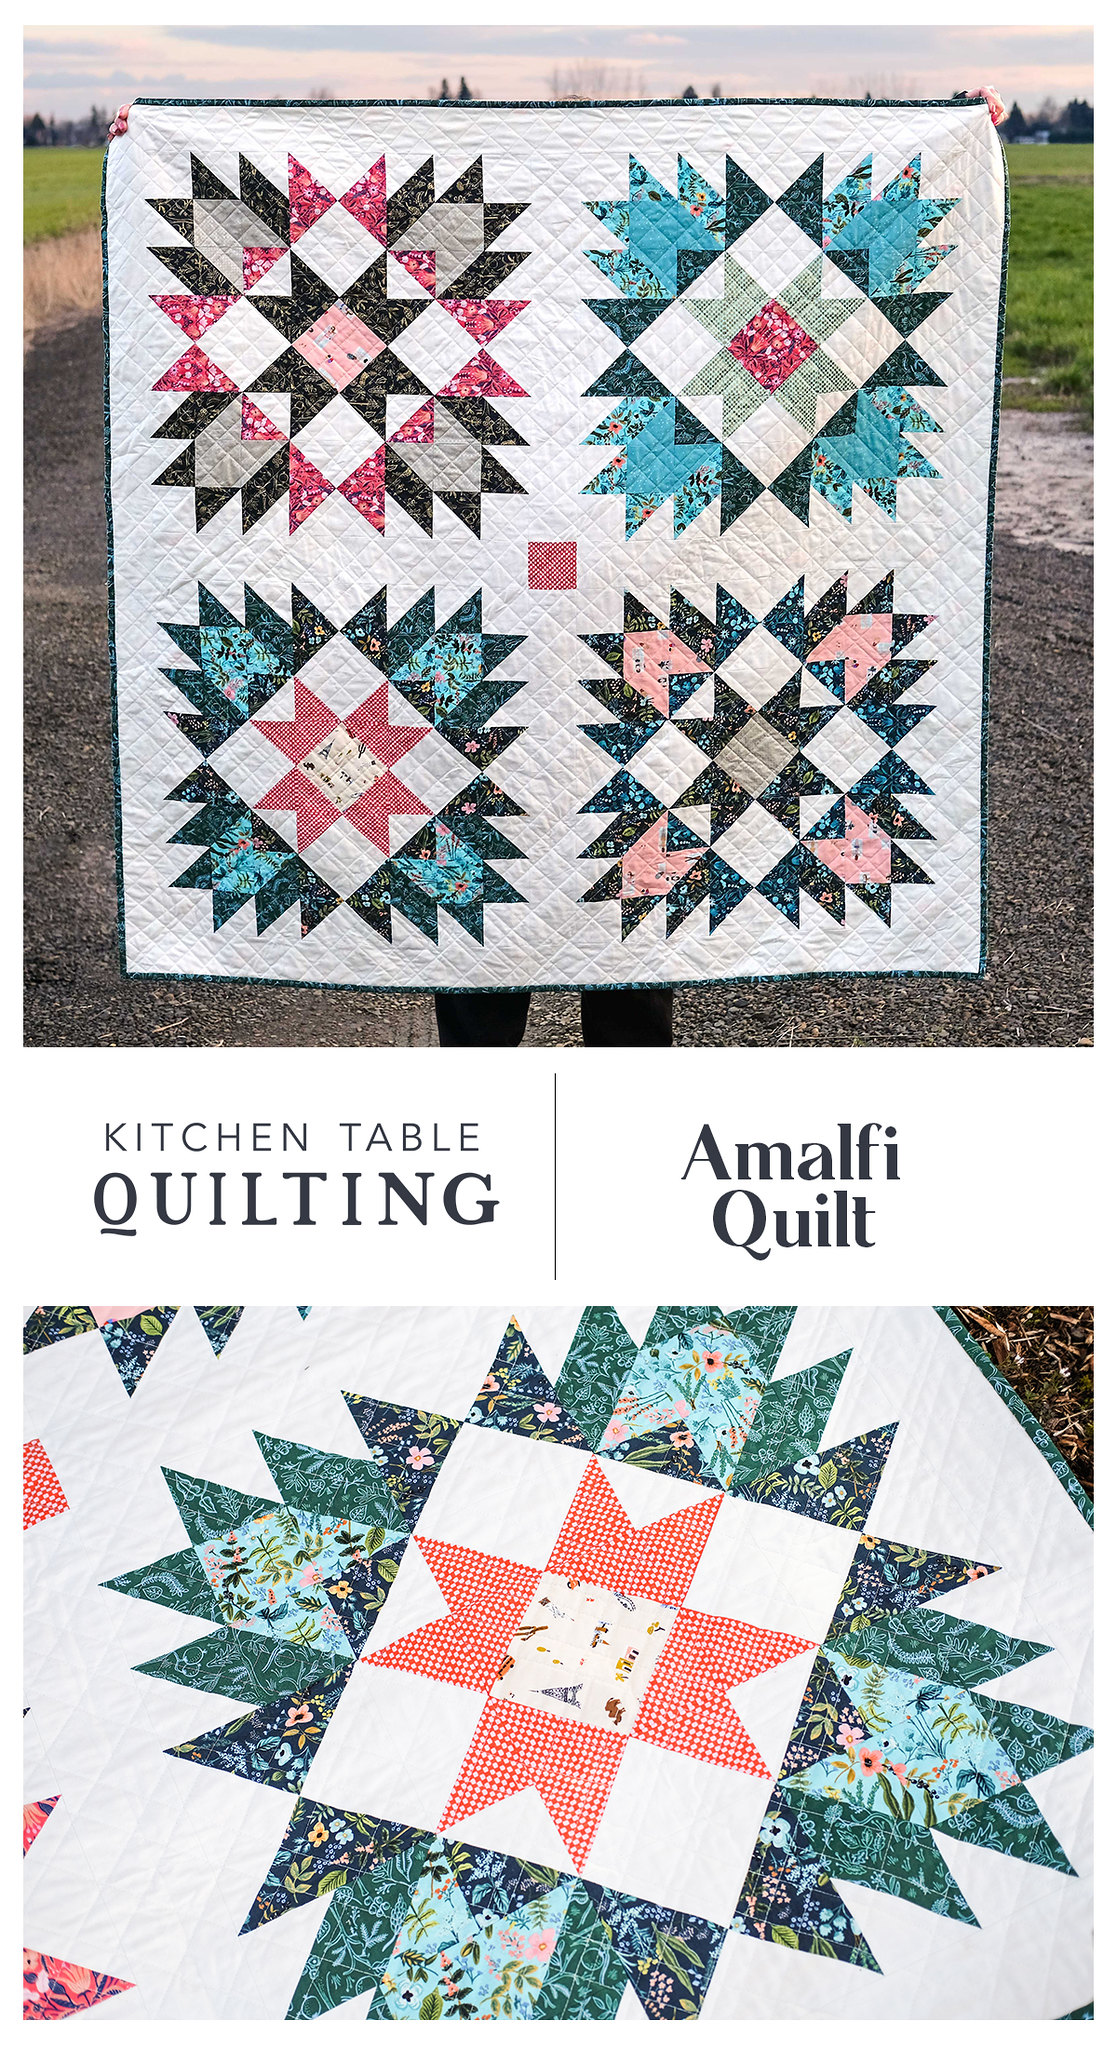 Amalfi Quilt - Kitchen Table Quilting